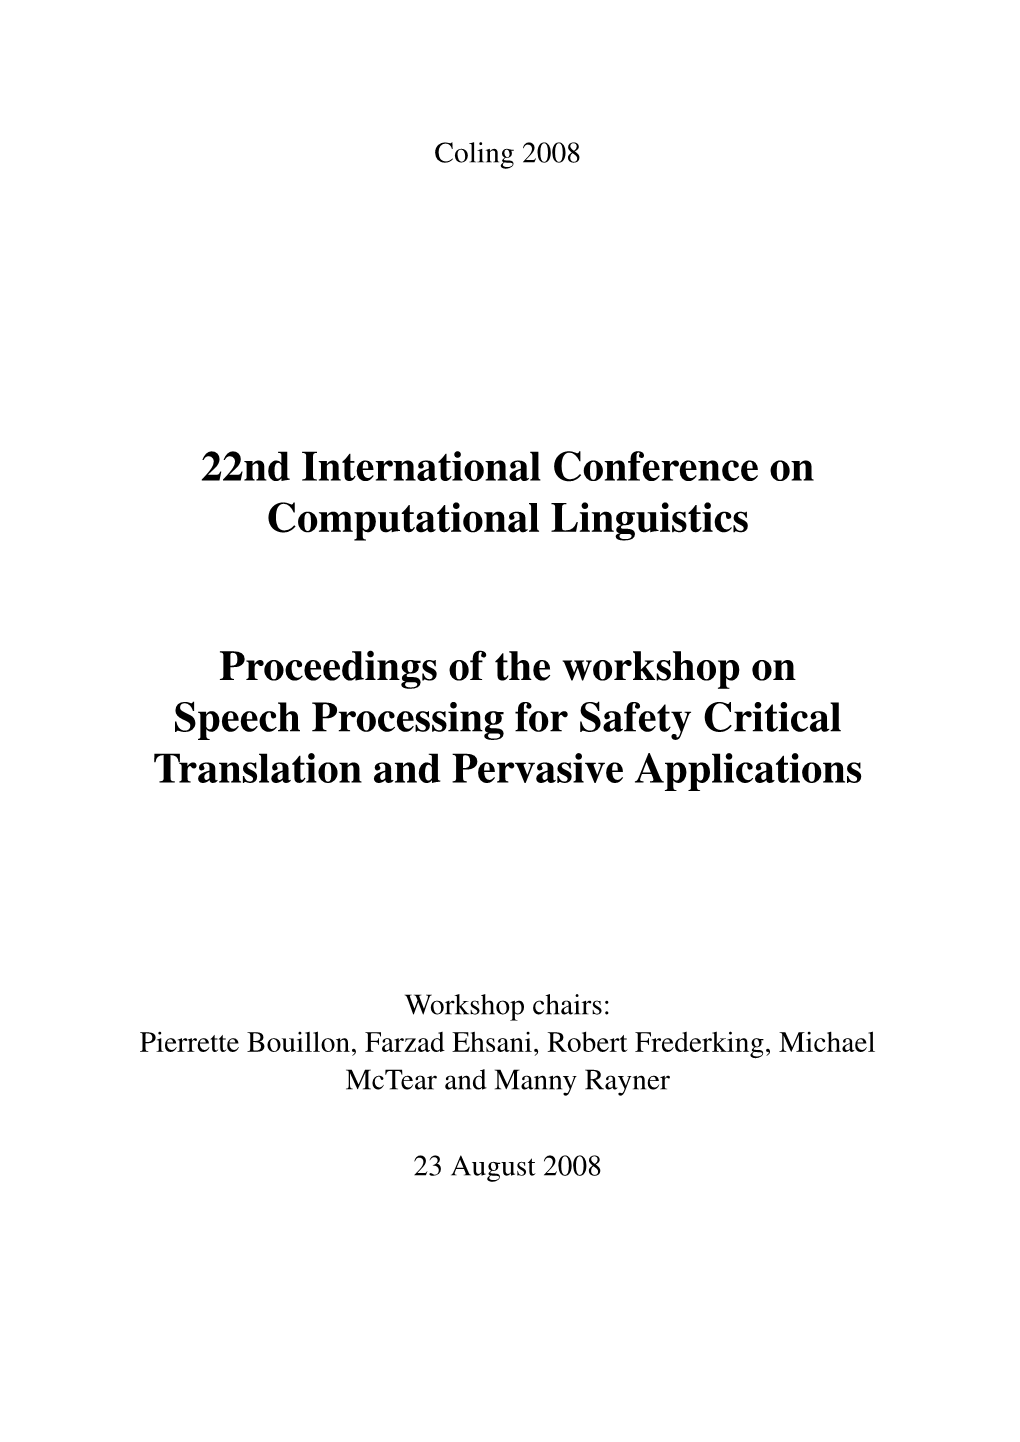 Proceedings of the Workshop on Speech Processing for Safety Critical Translation and Pervasive Applications